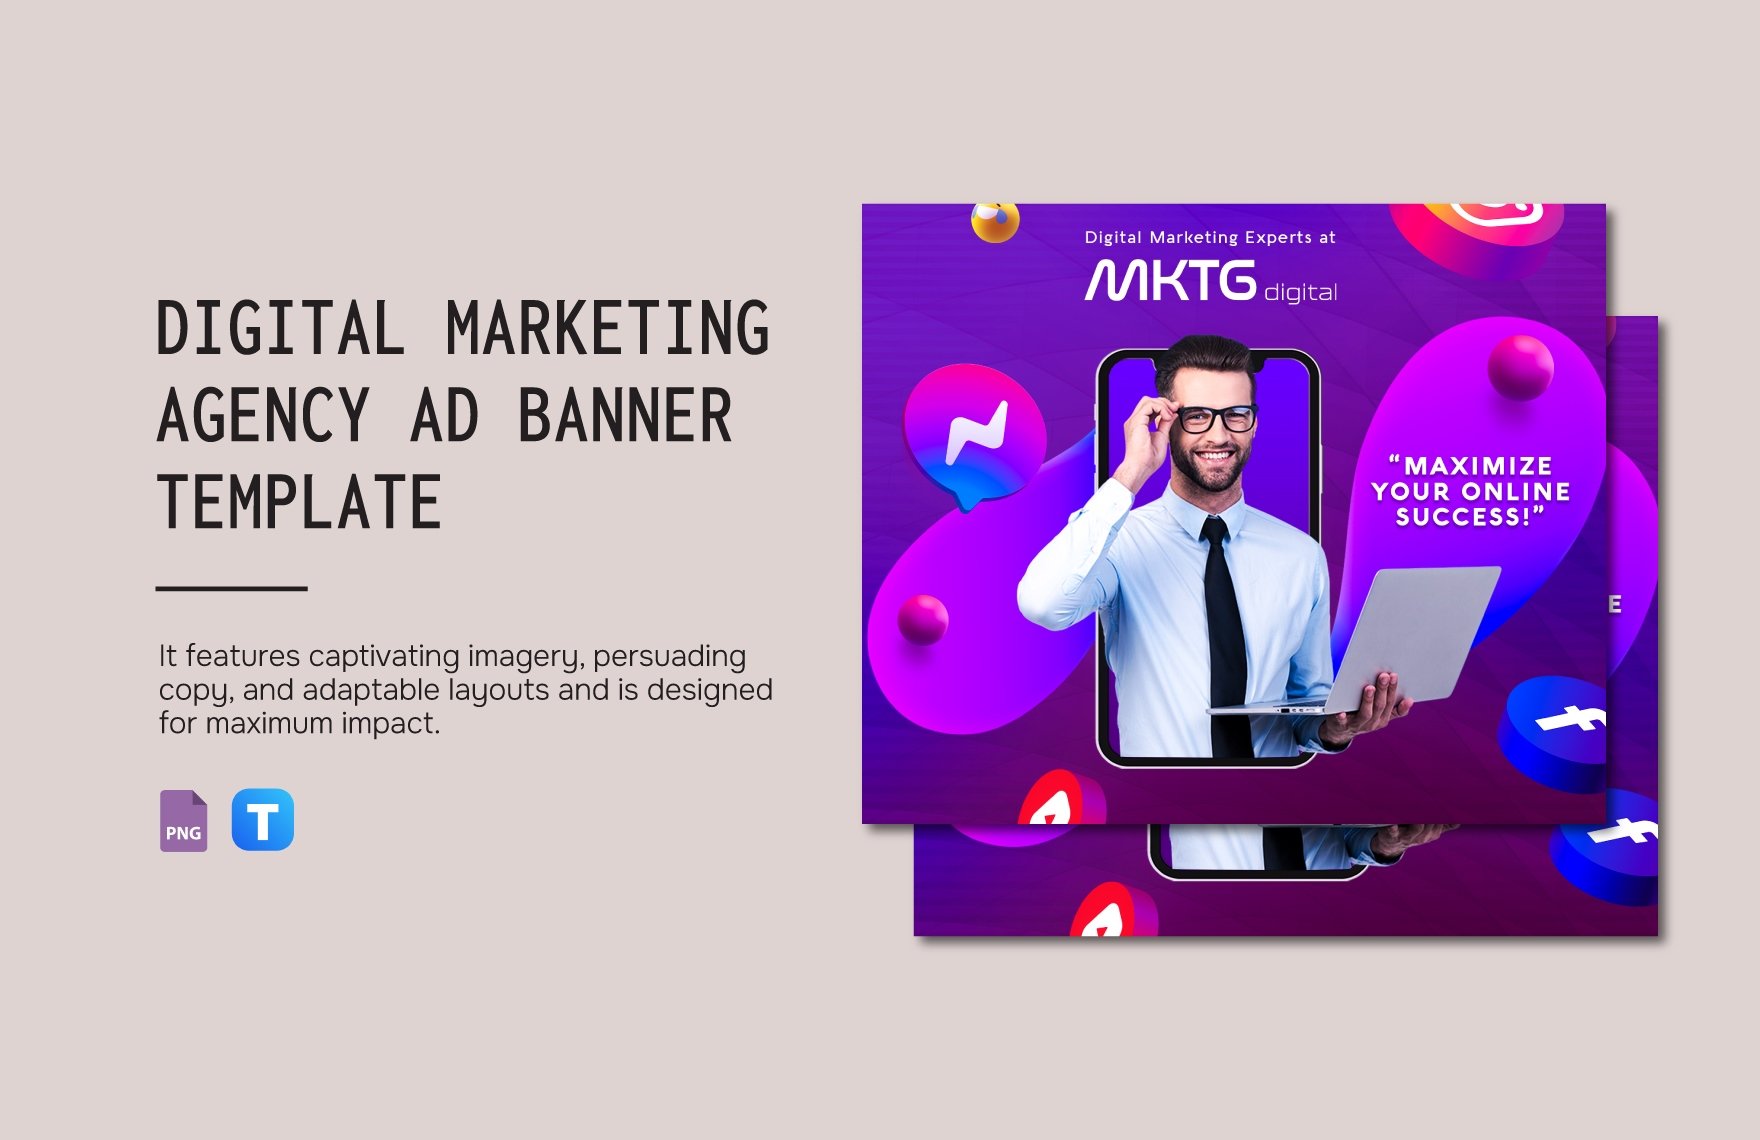 Digital Marketing Agency Ad Banner Template in PNG